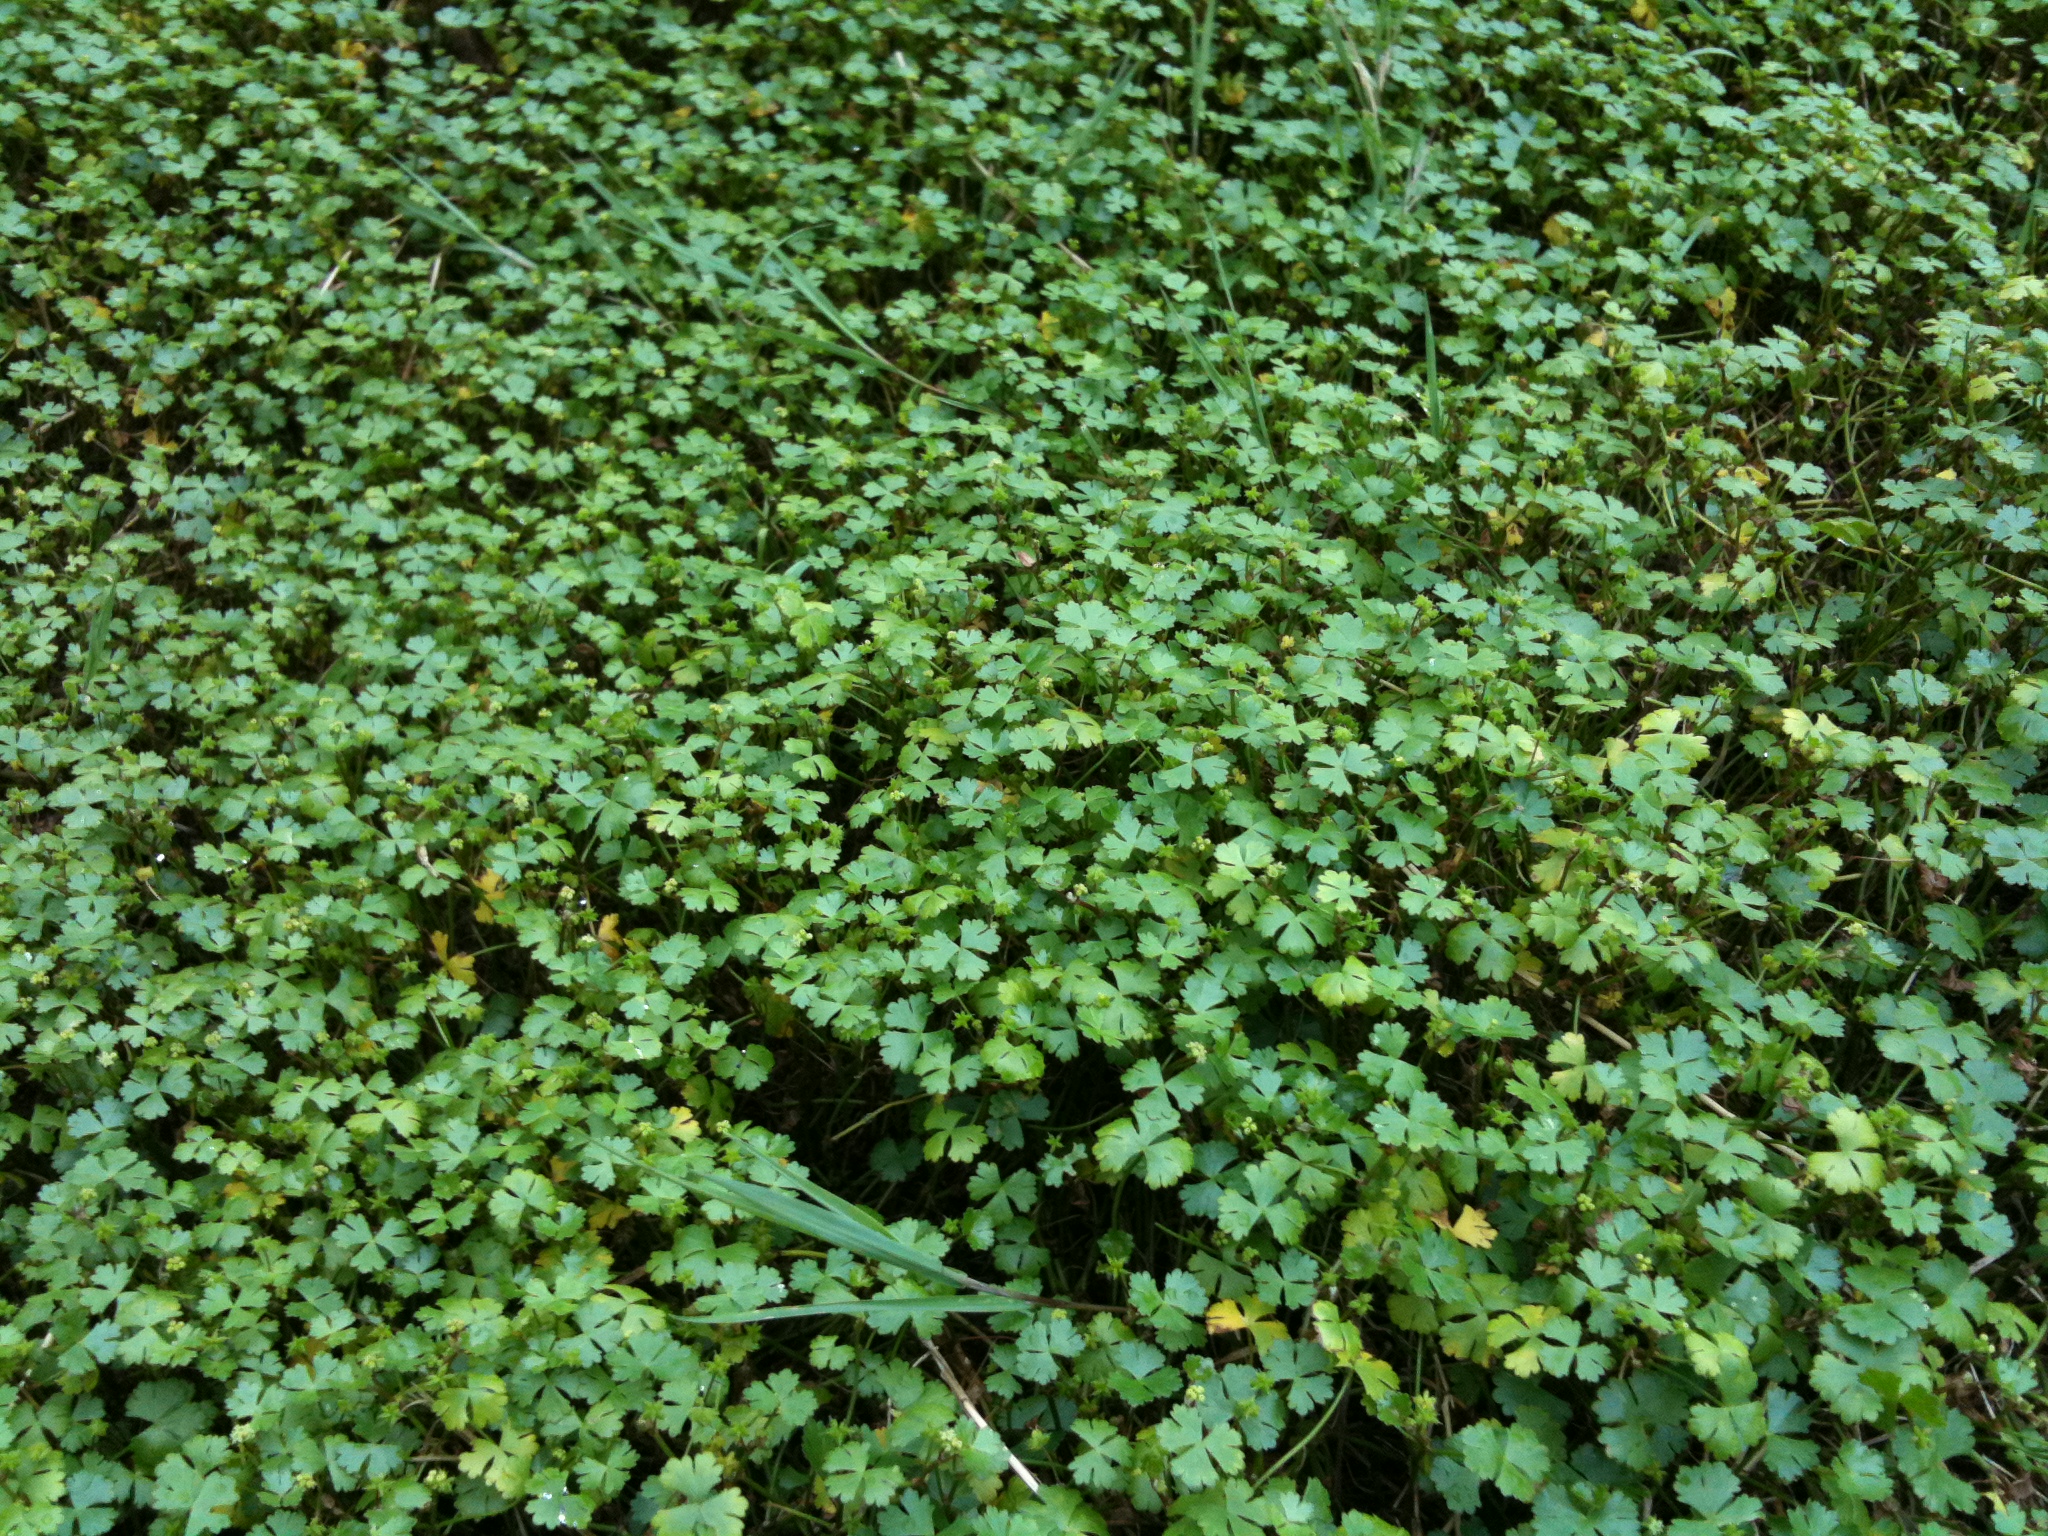 a very green patch with many leaves in it